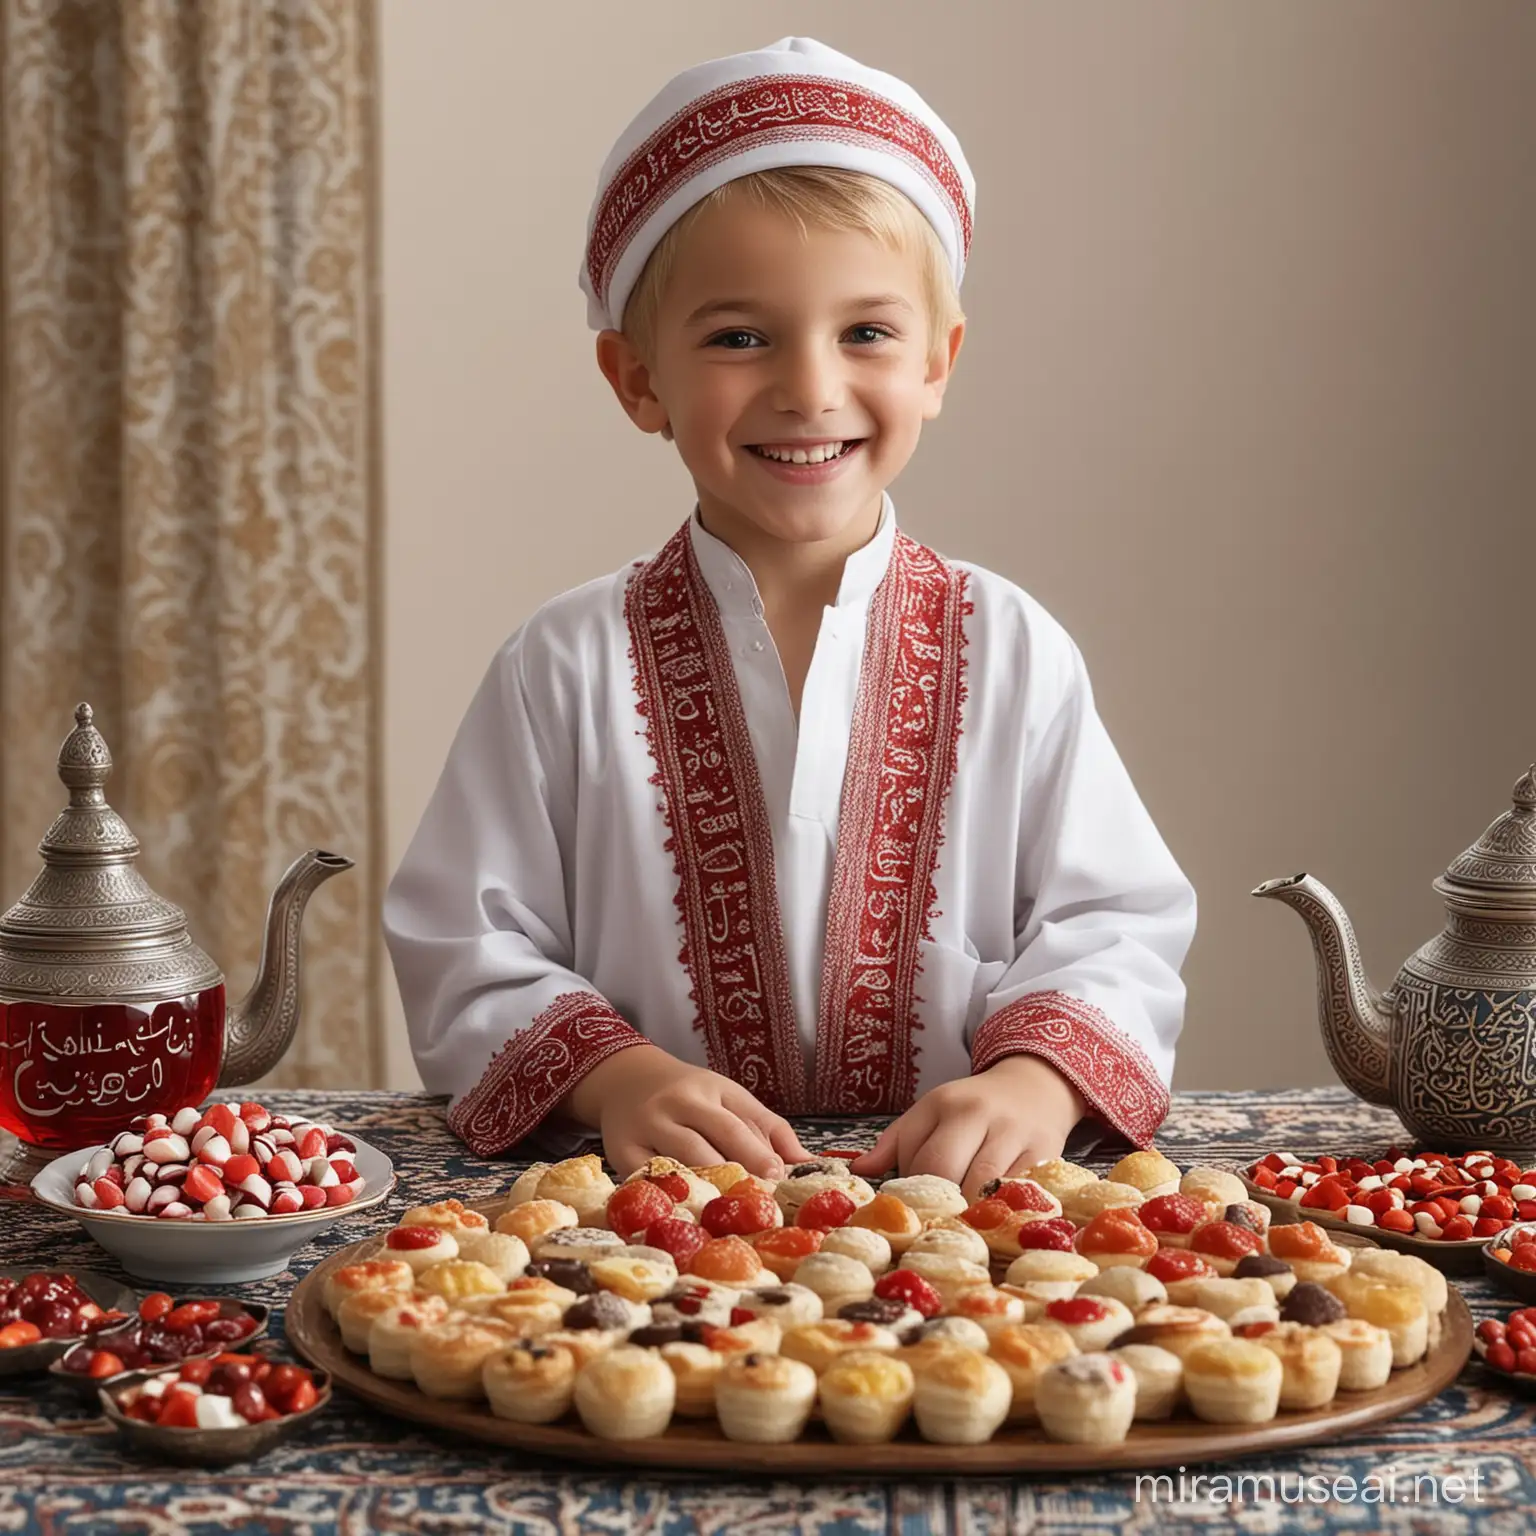 A real picture of a five-year-old French blond boy in Islamic clothing, elegant and smiling, celebrating Eid al-Fitr. In front of him is a table with a variety of sweets and a teapot. He wears a traditional robe that is half white and half red. Behind it is the name “Karim” written in red crystal, and in front of it is the words “Eid Mubarak.” Realistic, high-quality 4K image